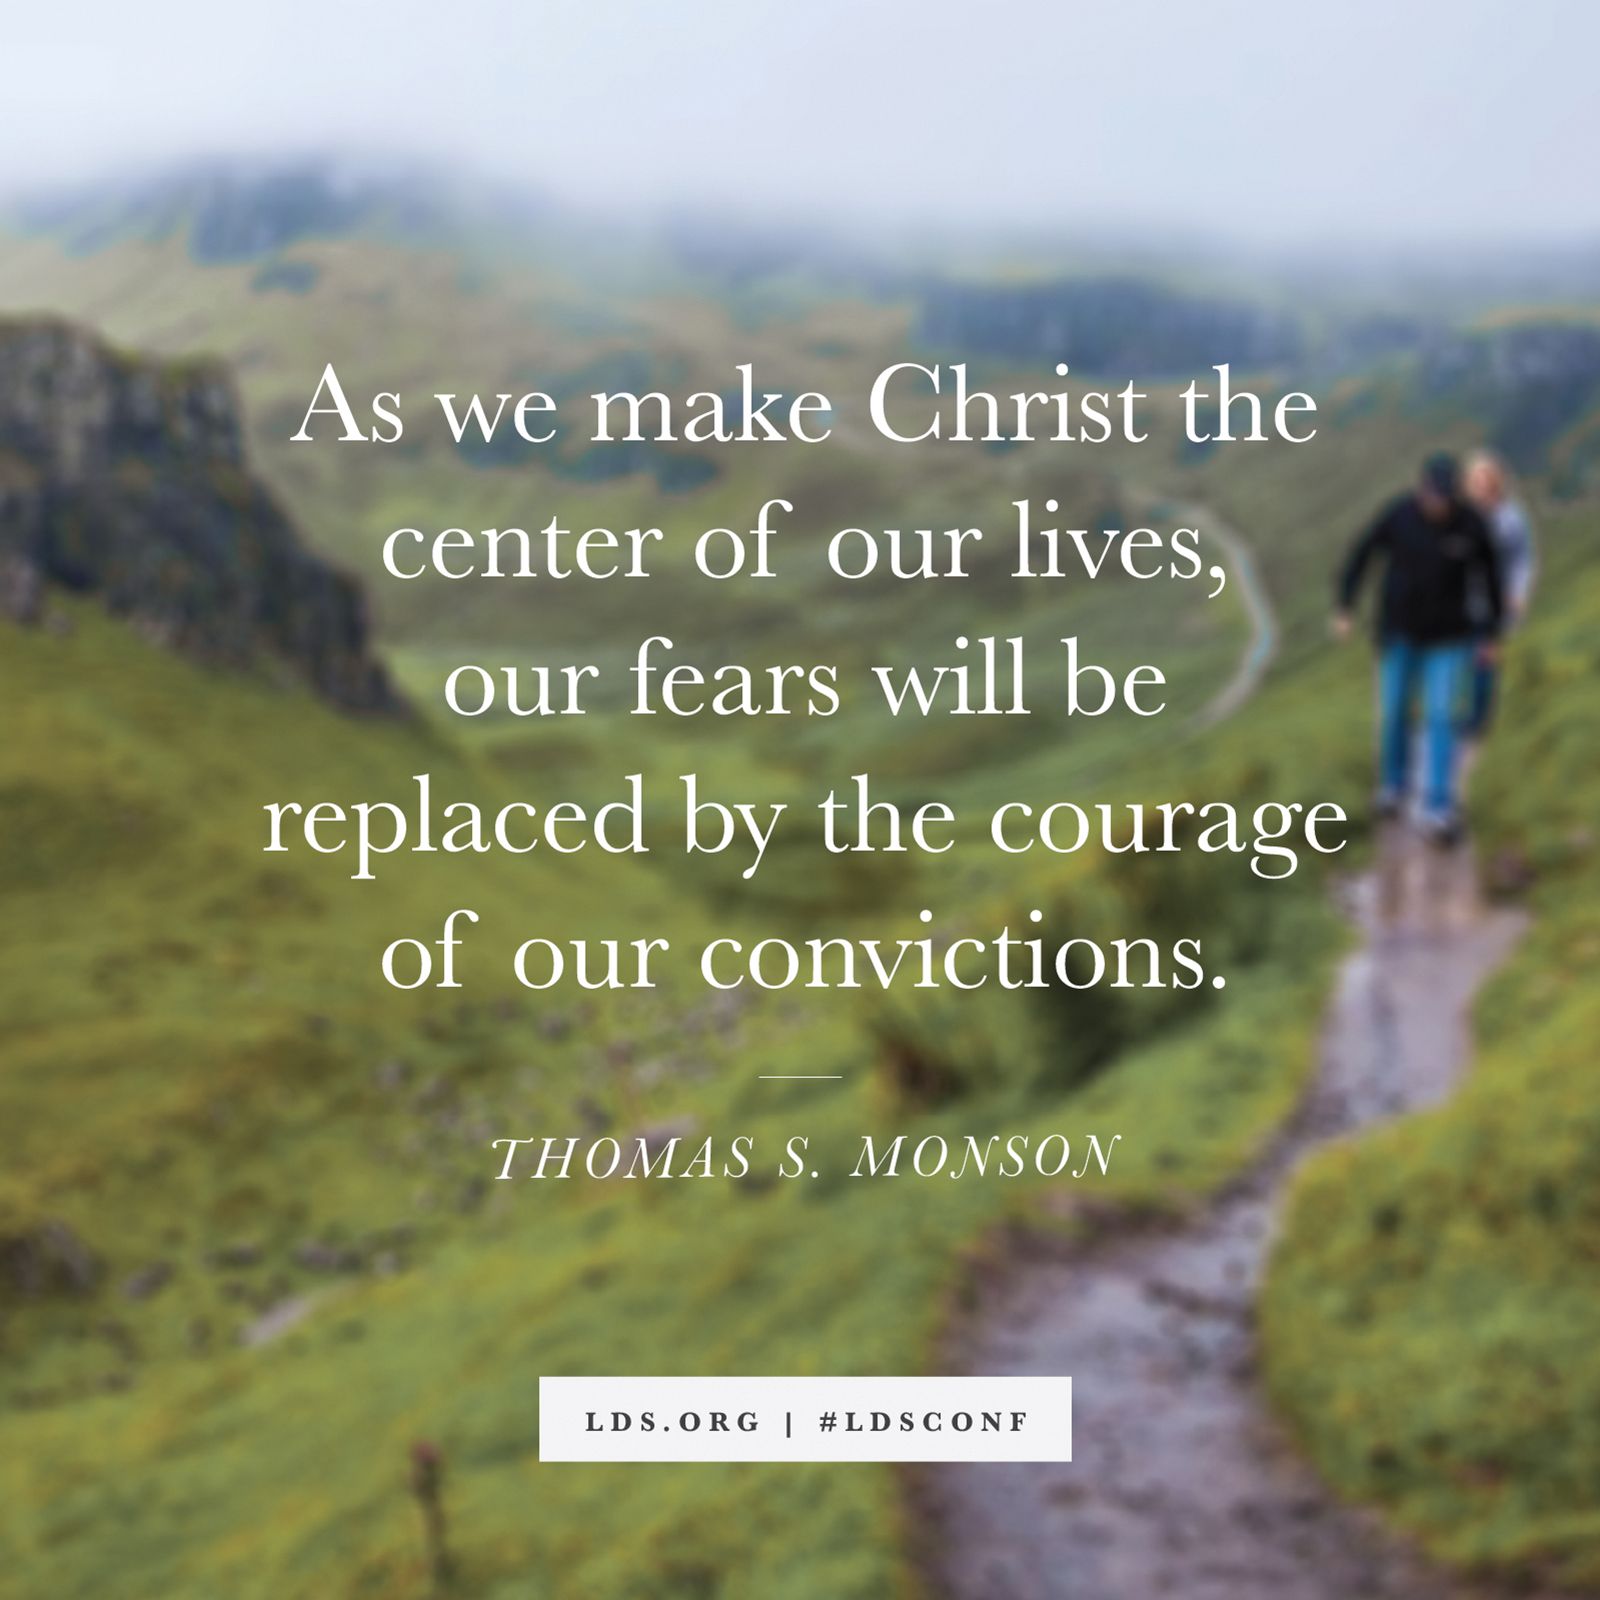 “As we make Christ the center of our lives, our fears will be replaced by the courage of our convictions.” —President Thomas S. Monson, “Be an Example and a Light”